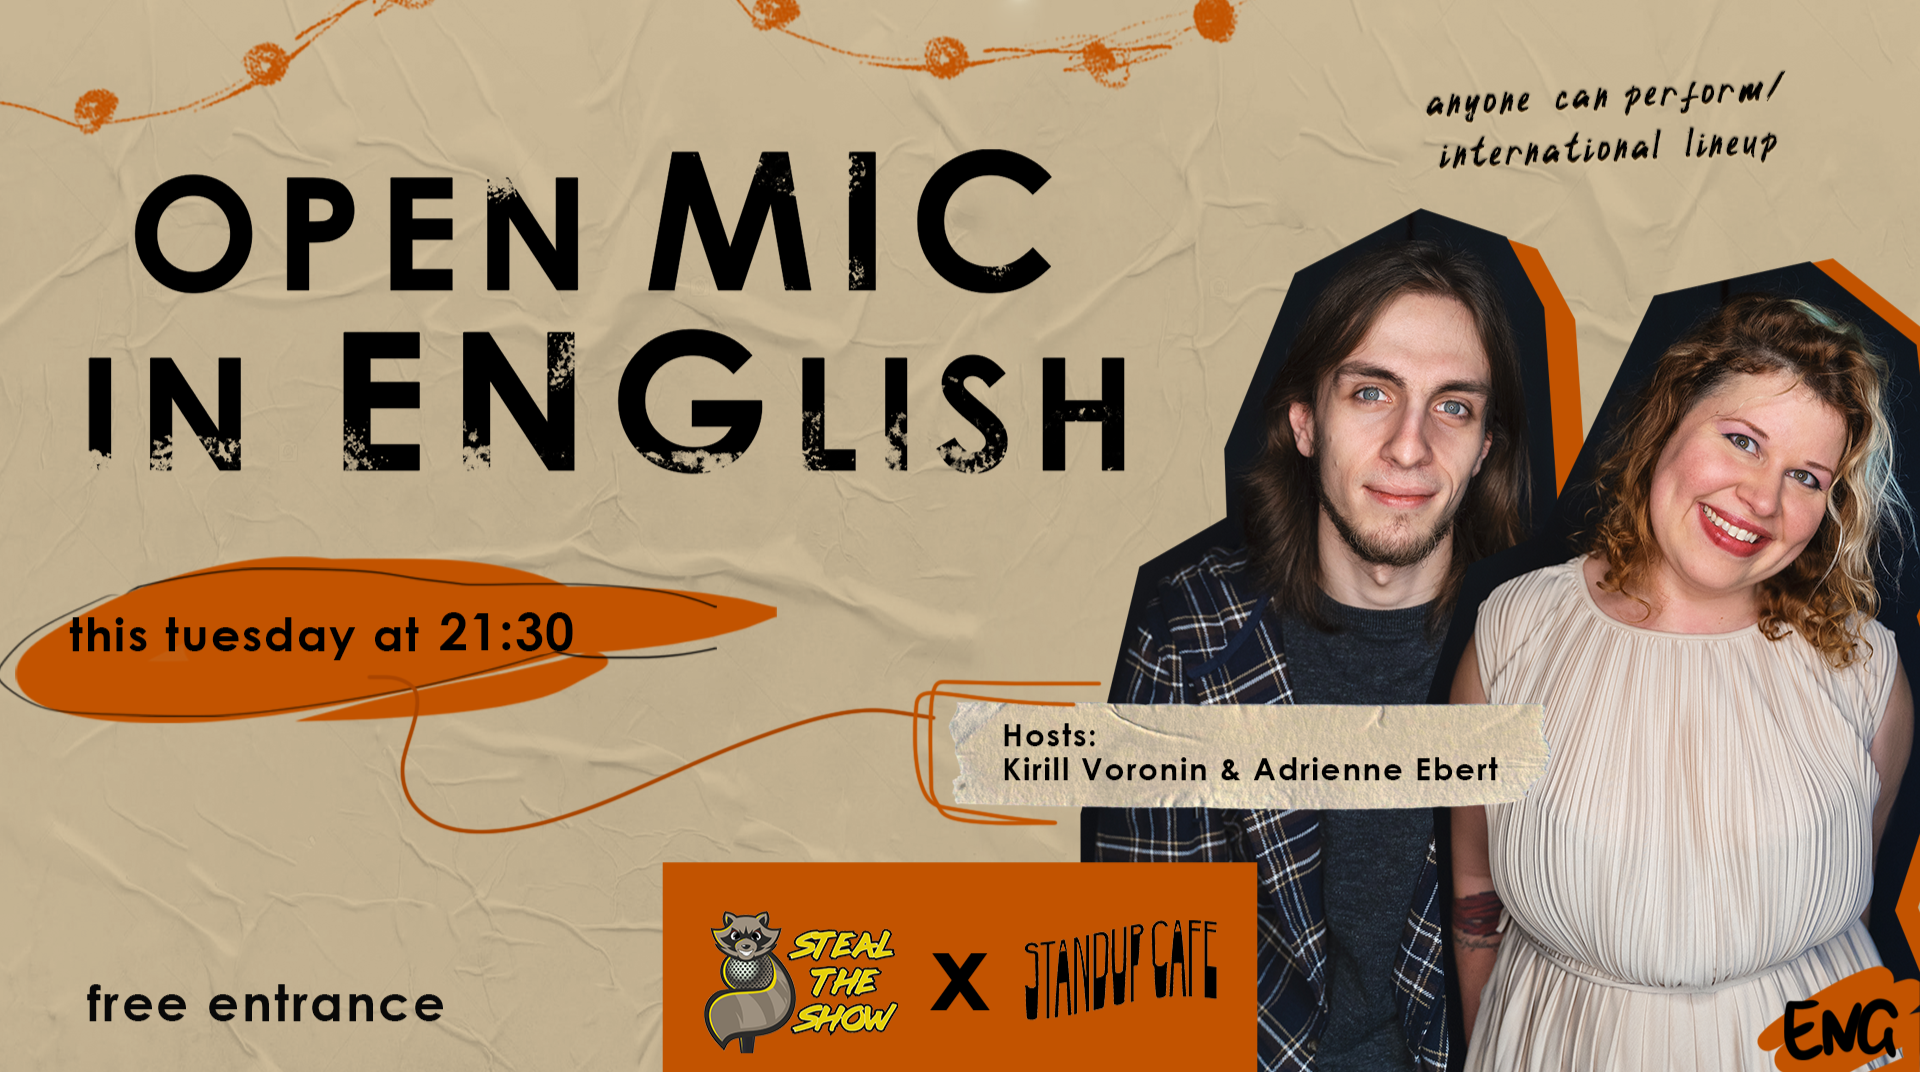 English stand. Eng. Standup. English comedy Evening отзывы.